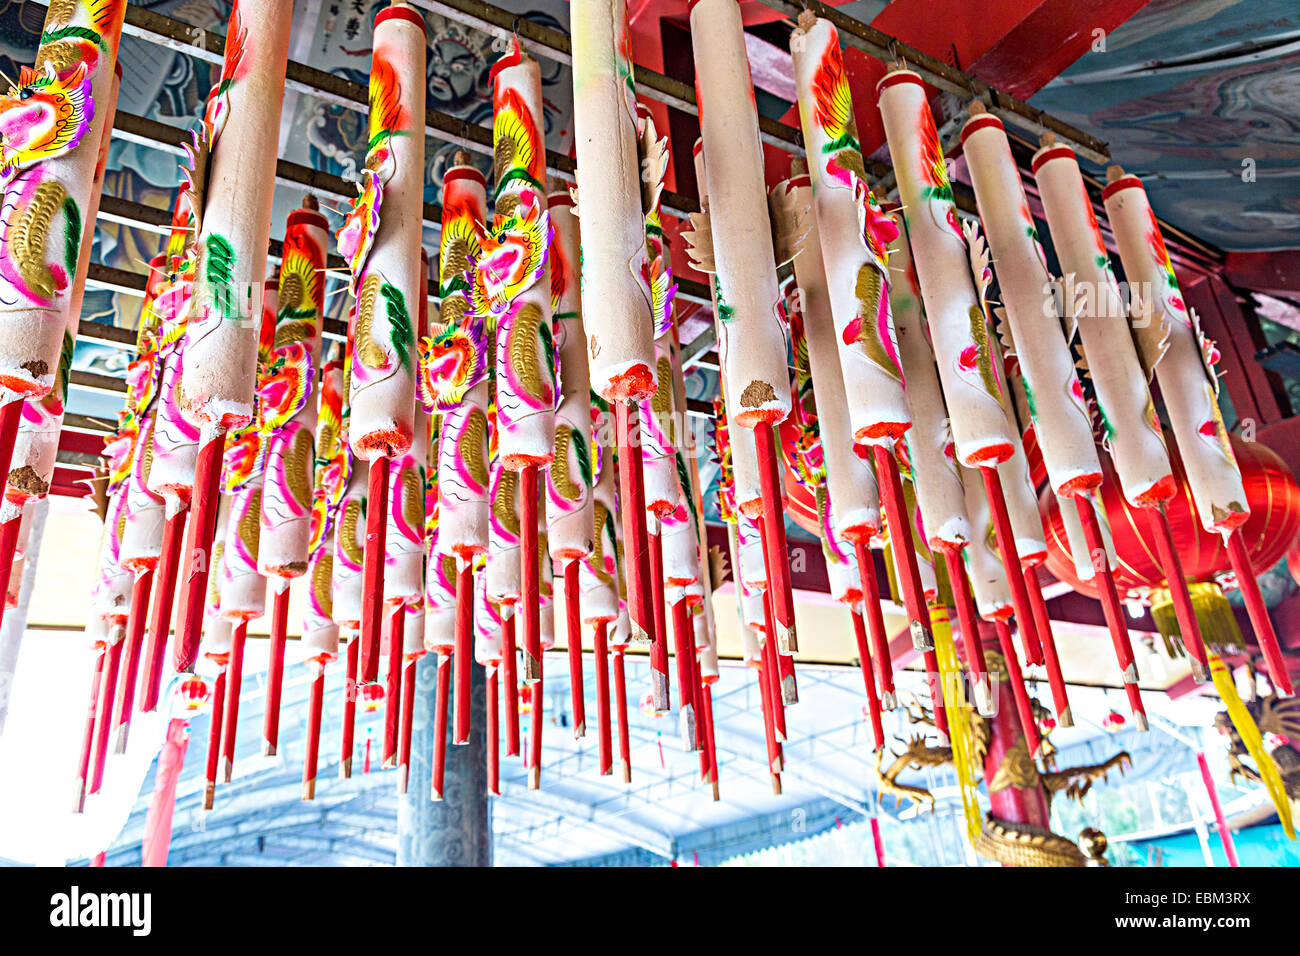 Incense candles for sale hanging from ceiling, Tua Pek Kong Chinese Temple, Miri, Sarawak, Malaysia Stock Photo